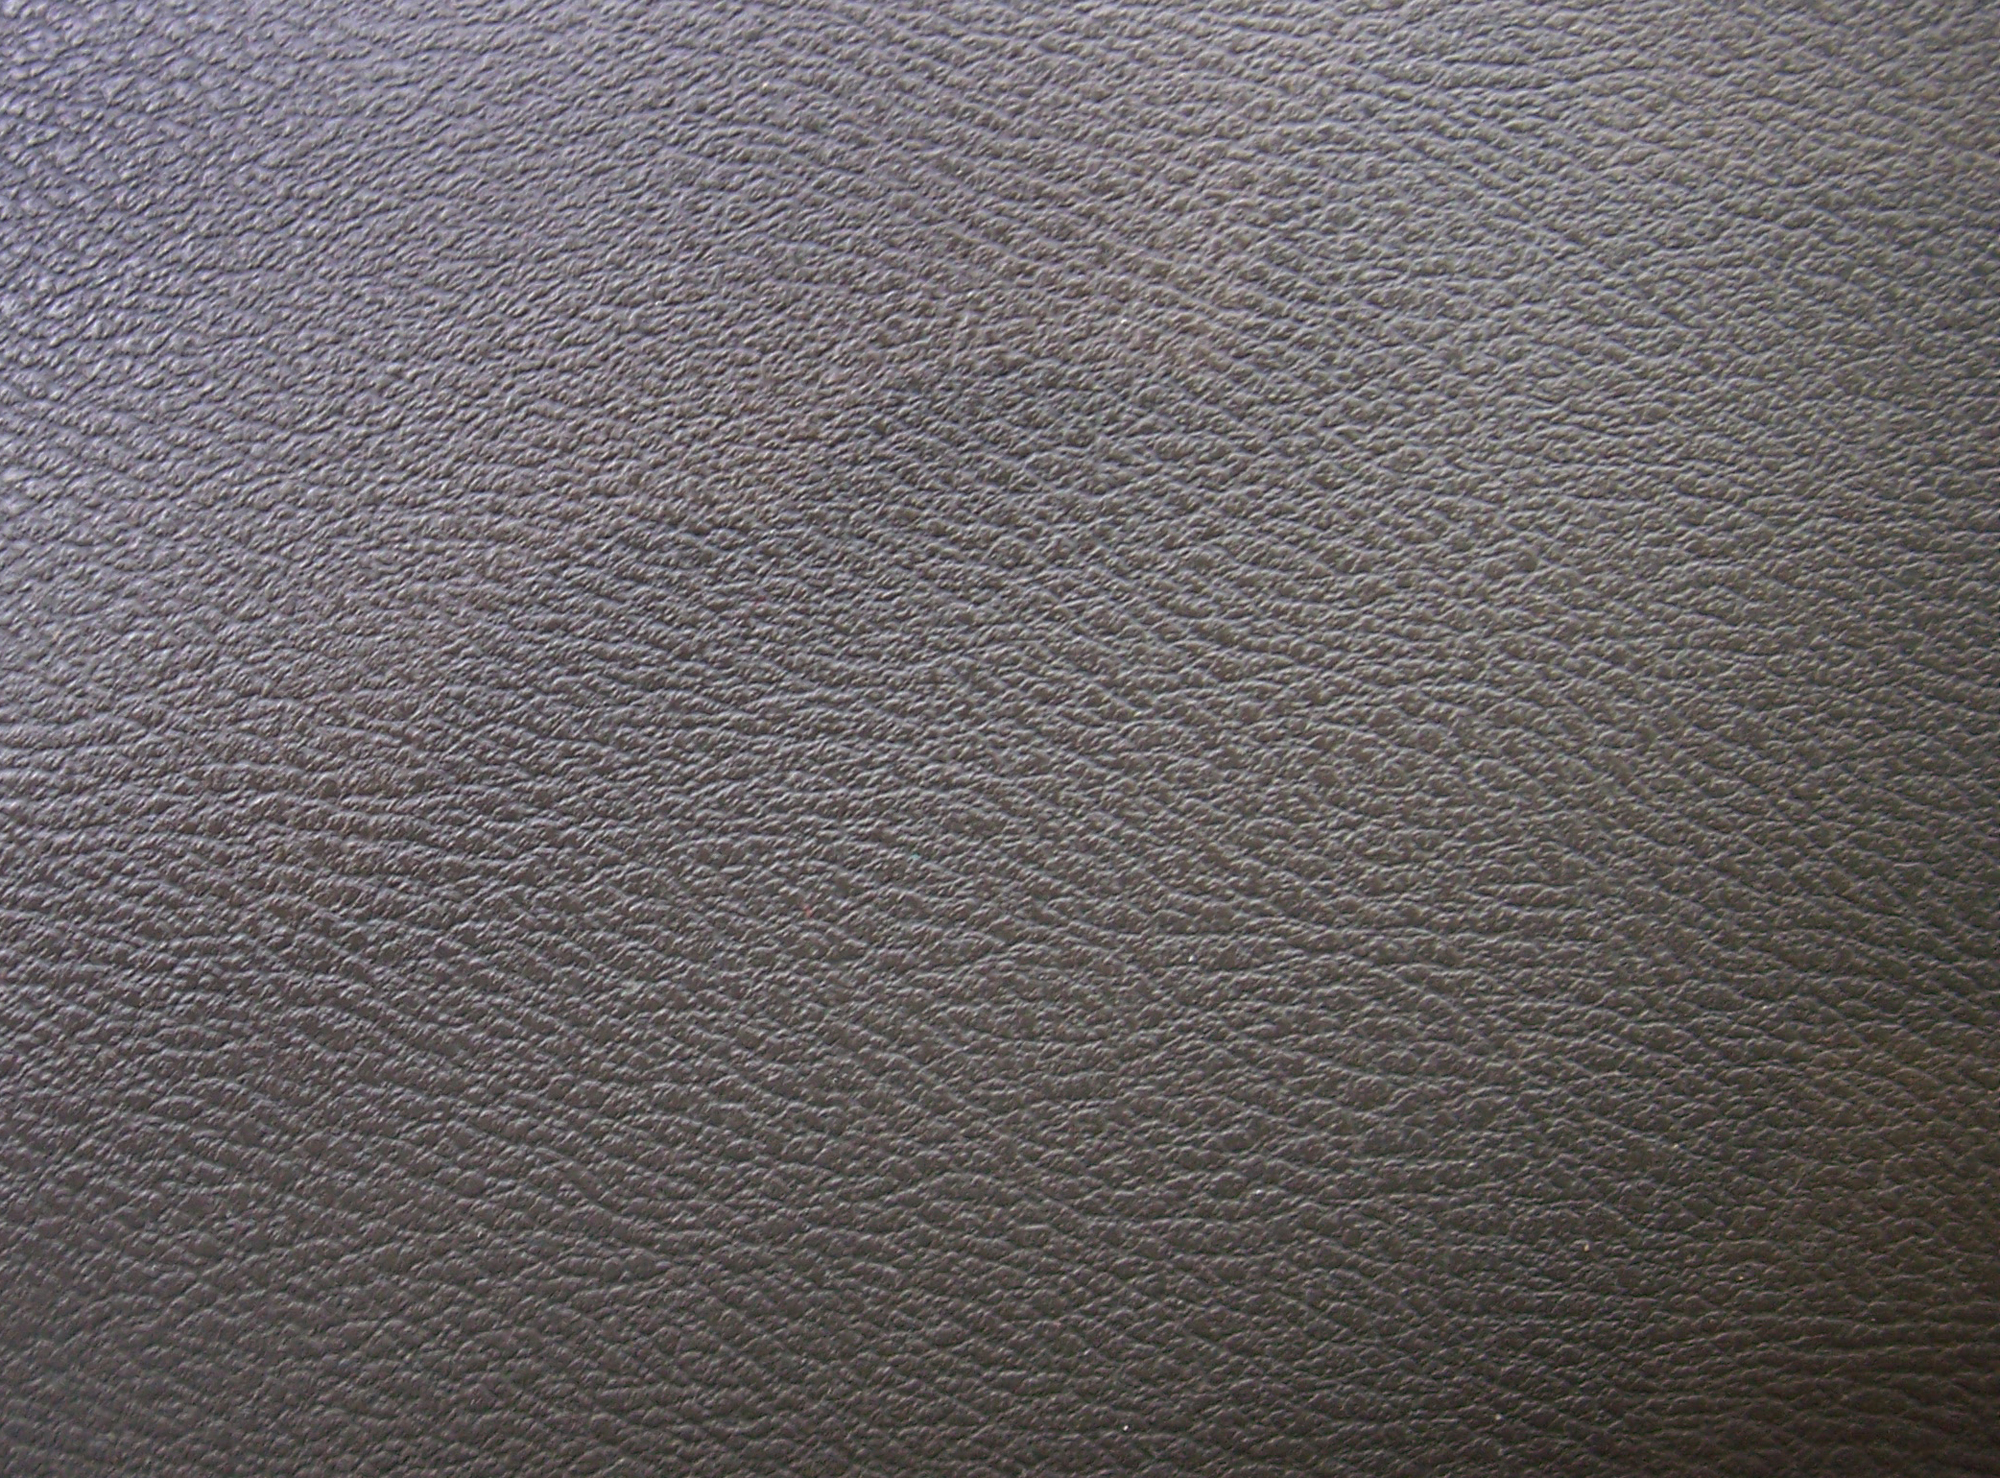 Car Dashboard :: Surface :: High Resolution Texture Library